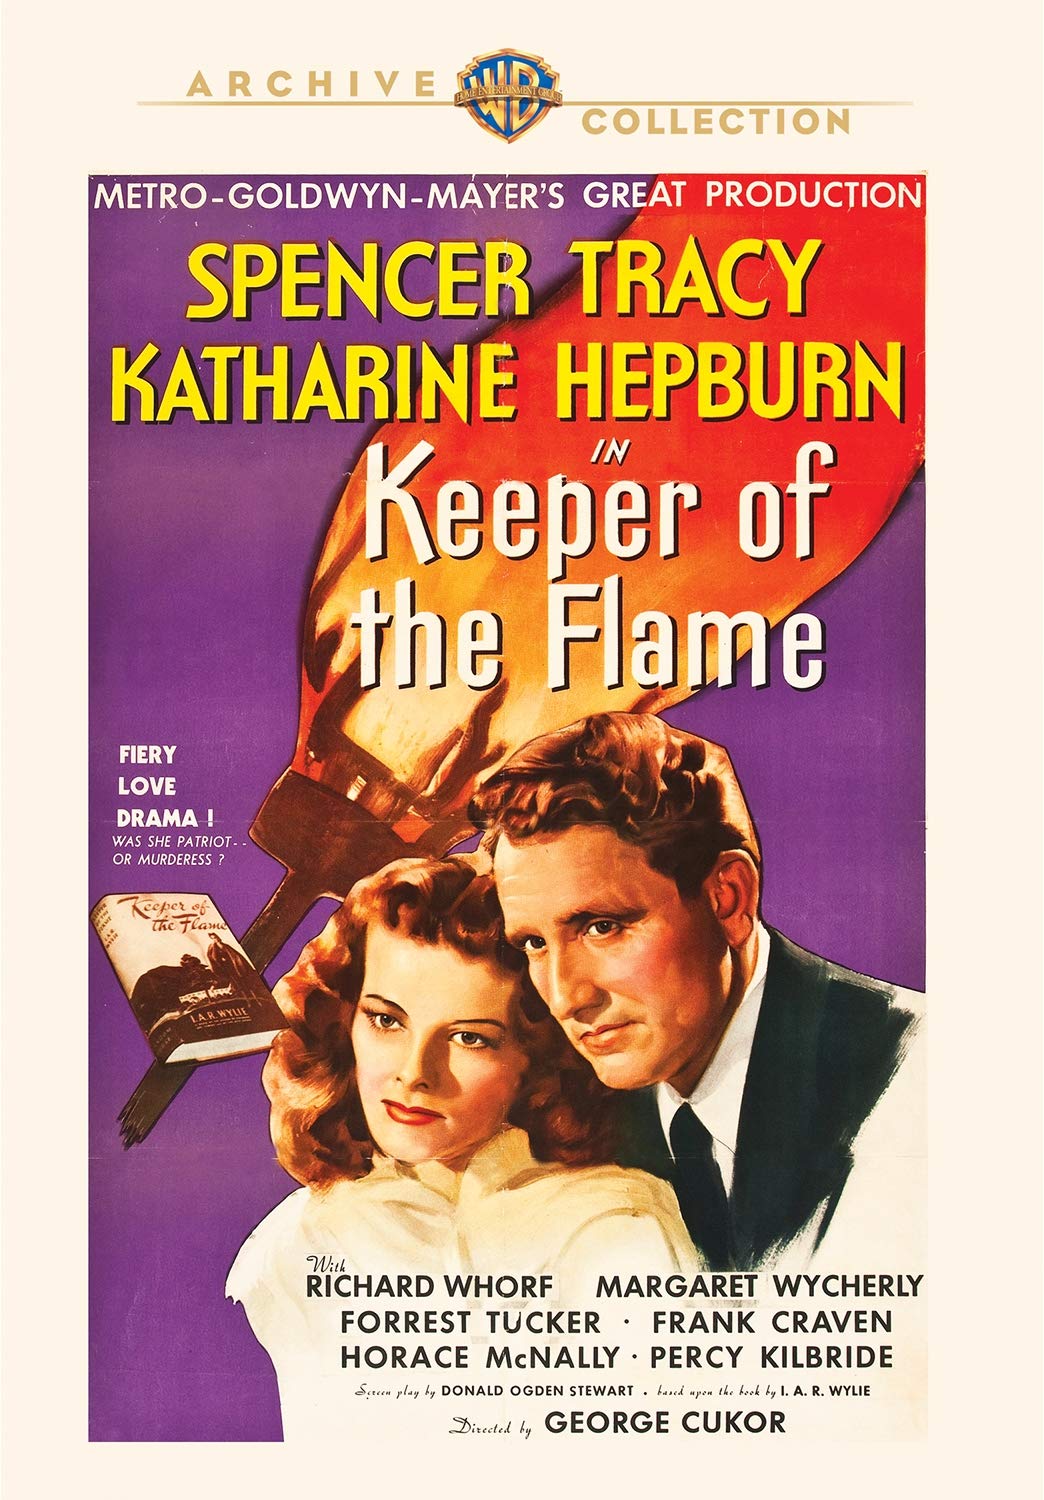 Keeper of the Flame (1942) starring Spencer Tracy, Katherine Hepburn